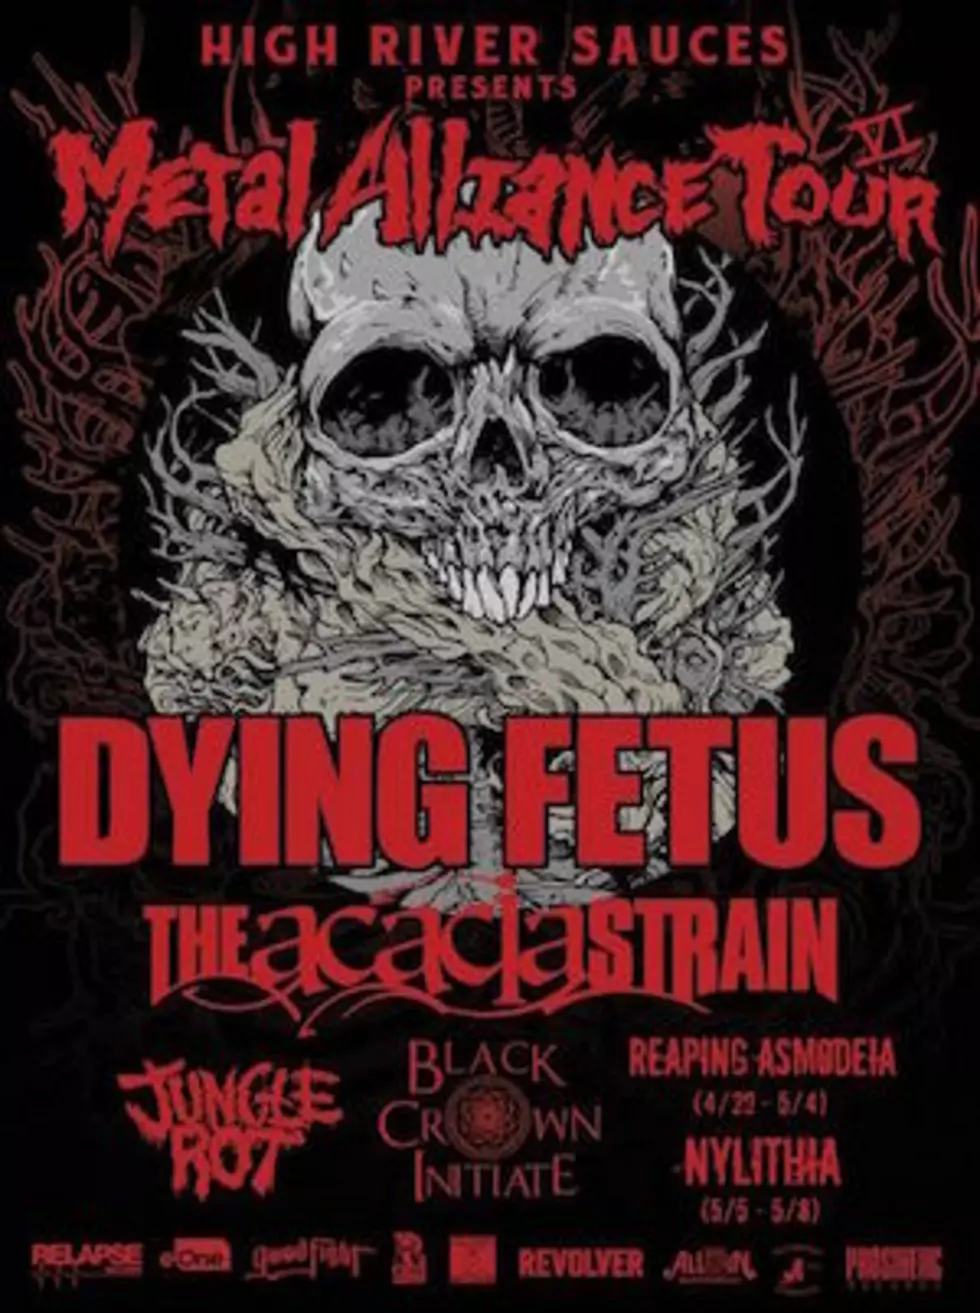 Dying Fetus, The Acacia Strain, Jungle Rot + Black Crown Initiate to Play 2016 Metal Alliance Tour